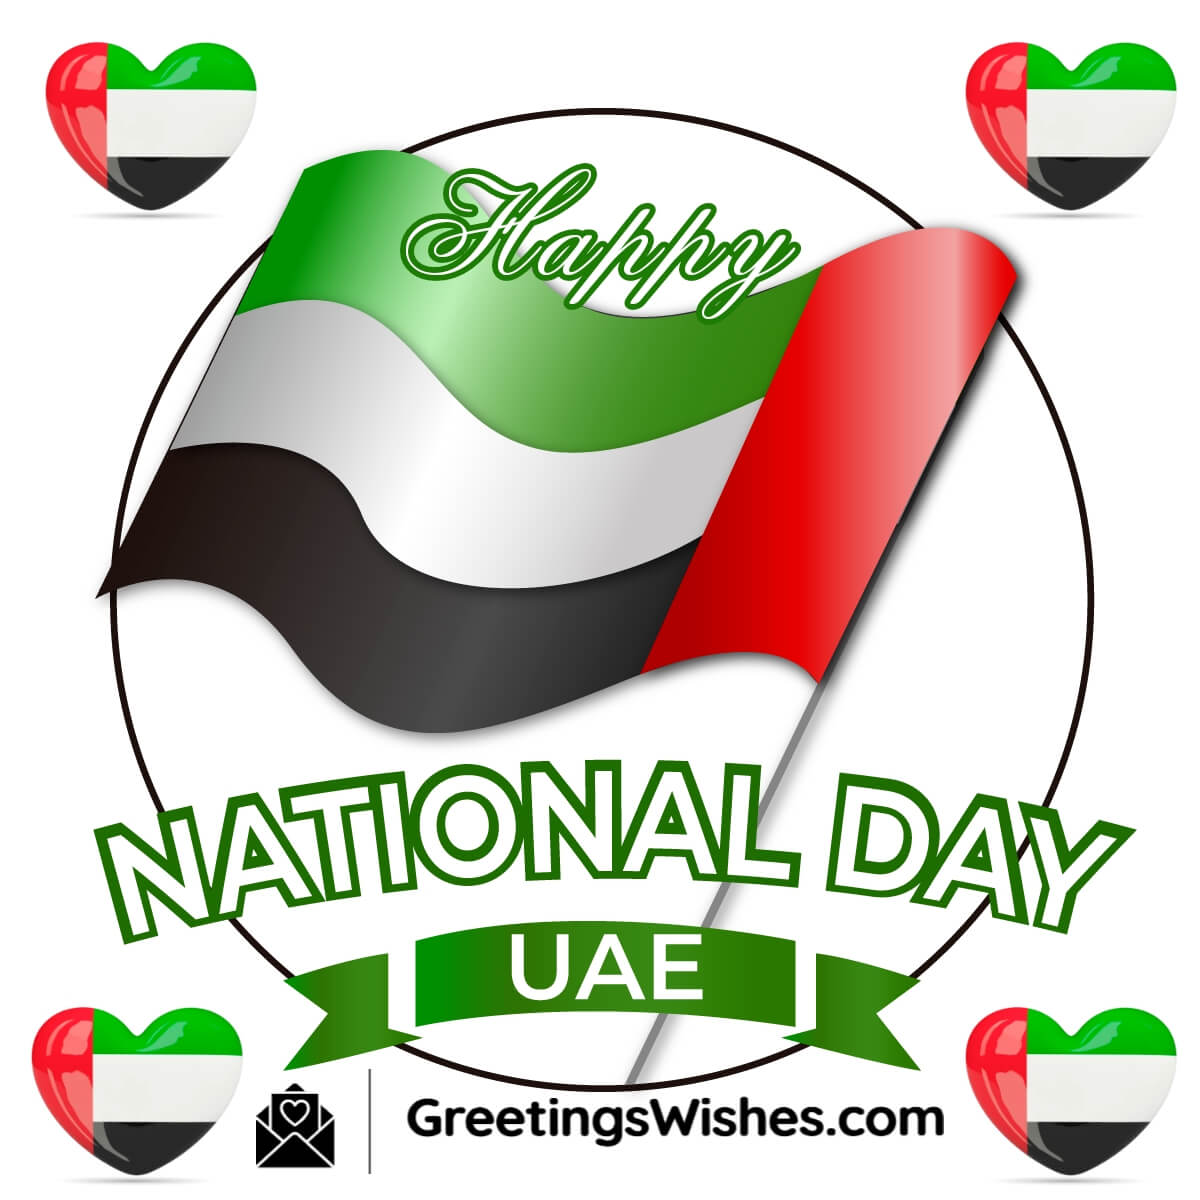 UAE National Day Wishes (2nd December)